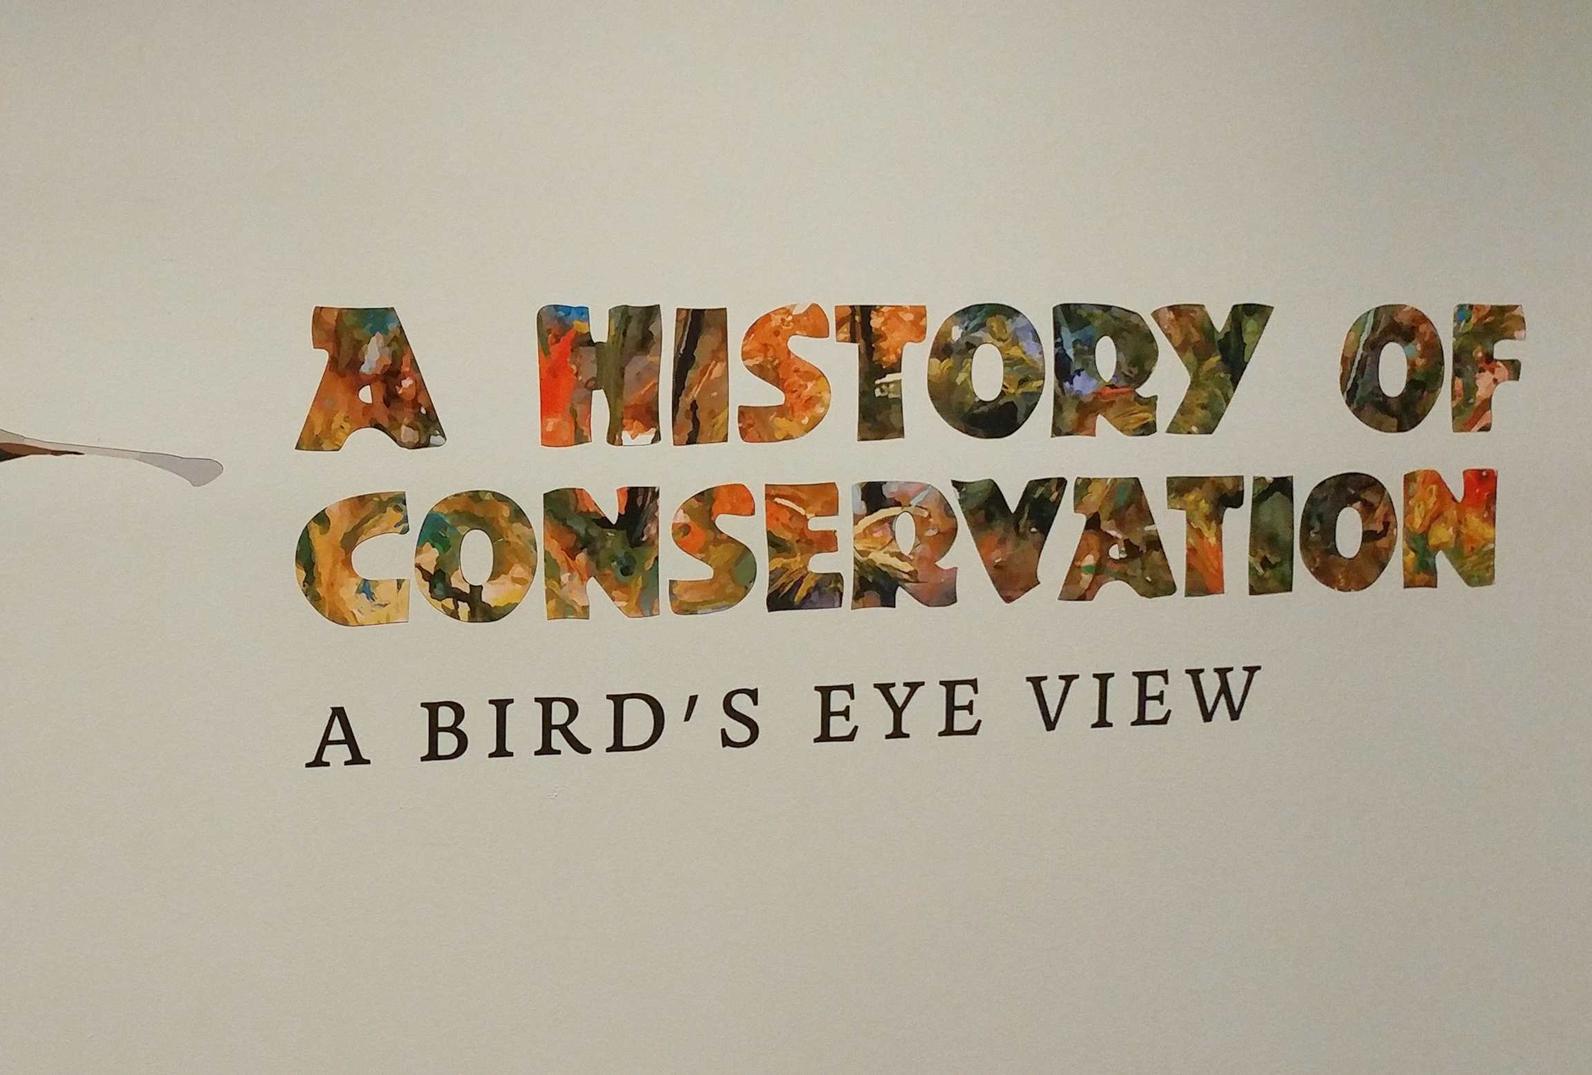 A History of Conservation